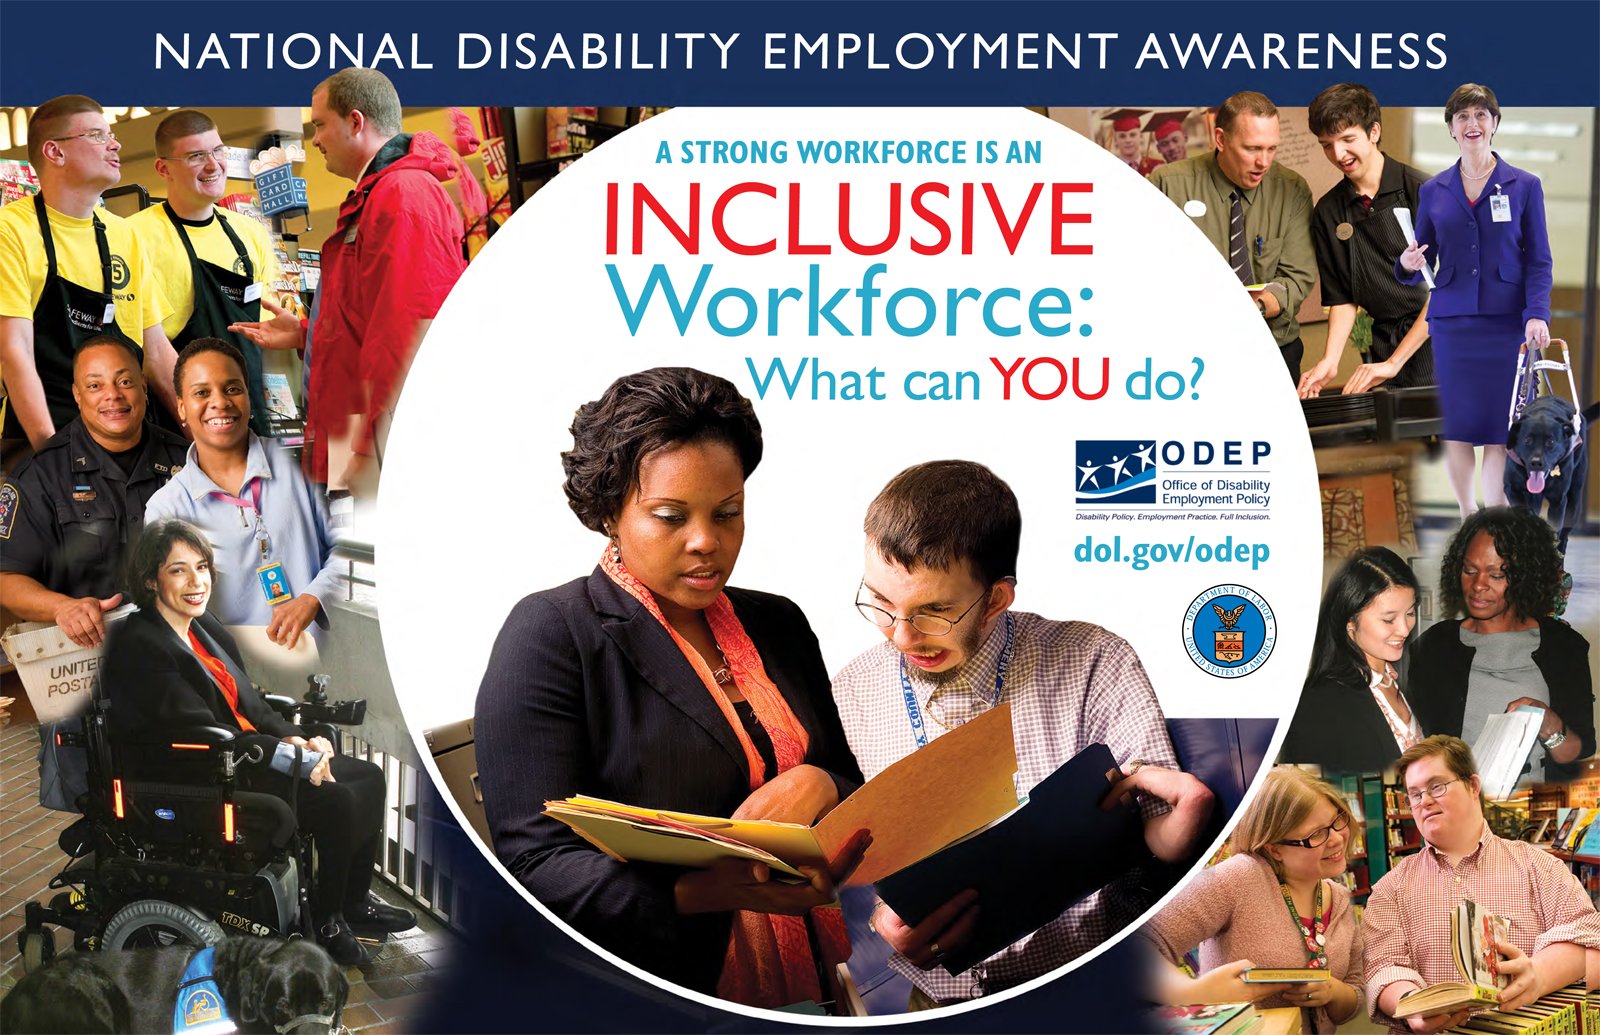 A Strong Workforce is an Inclusive Workforce: What Can YOU Do?